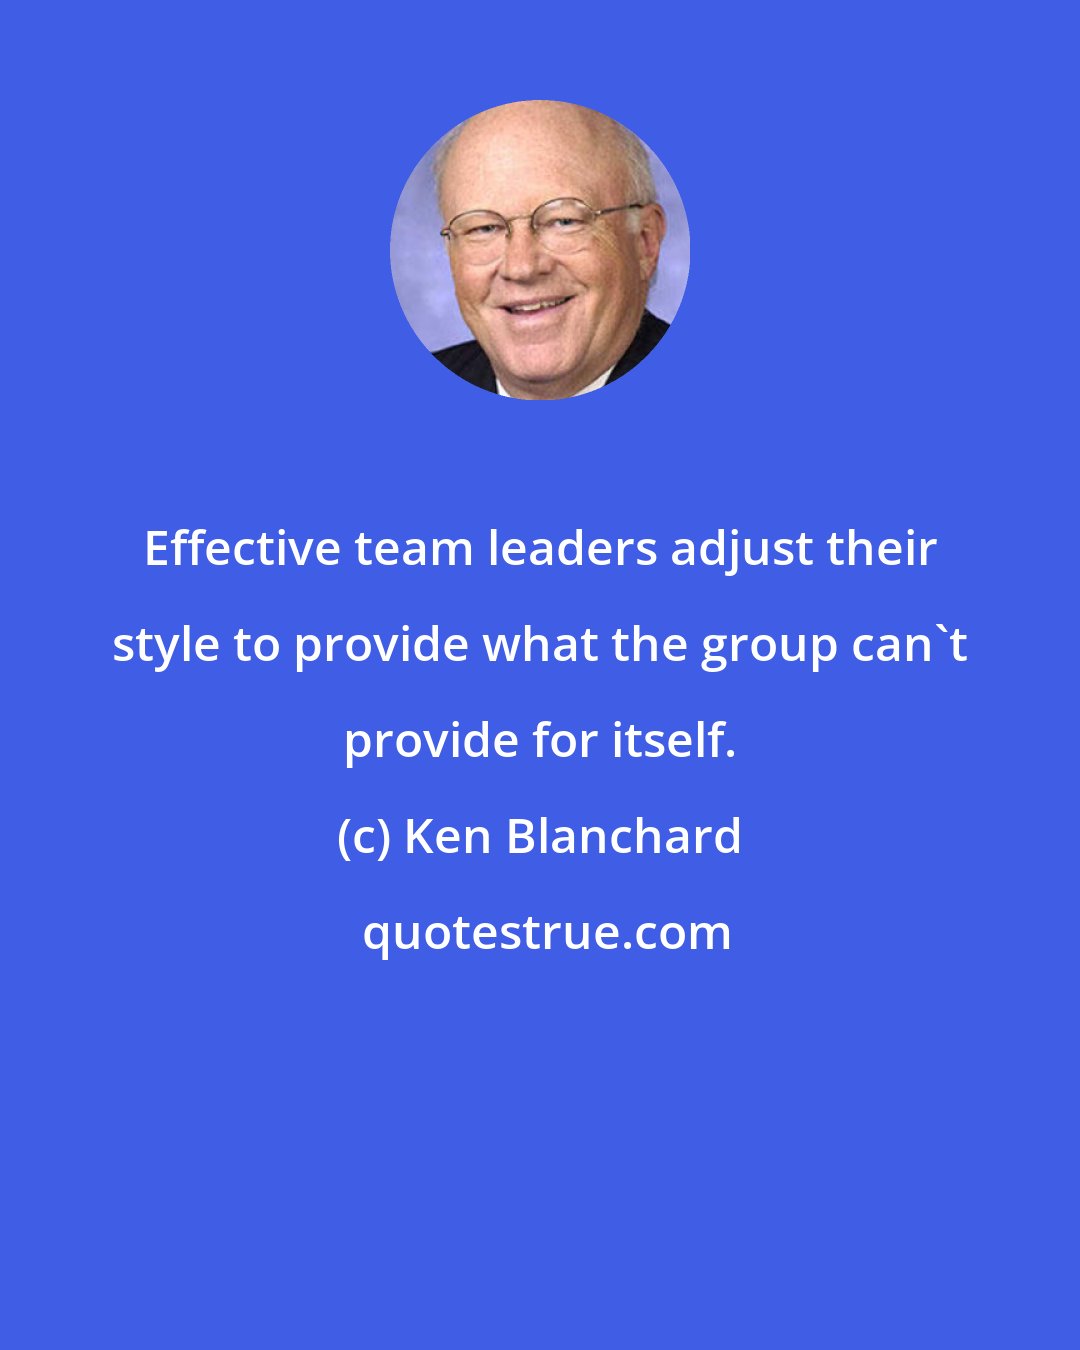 Ken Blanchard: Effective team leaders adjust their style to provide what the group can't provide for itself.